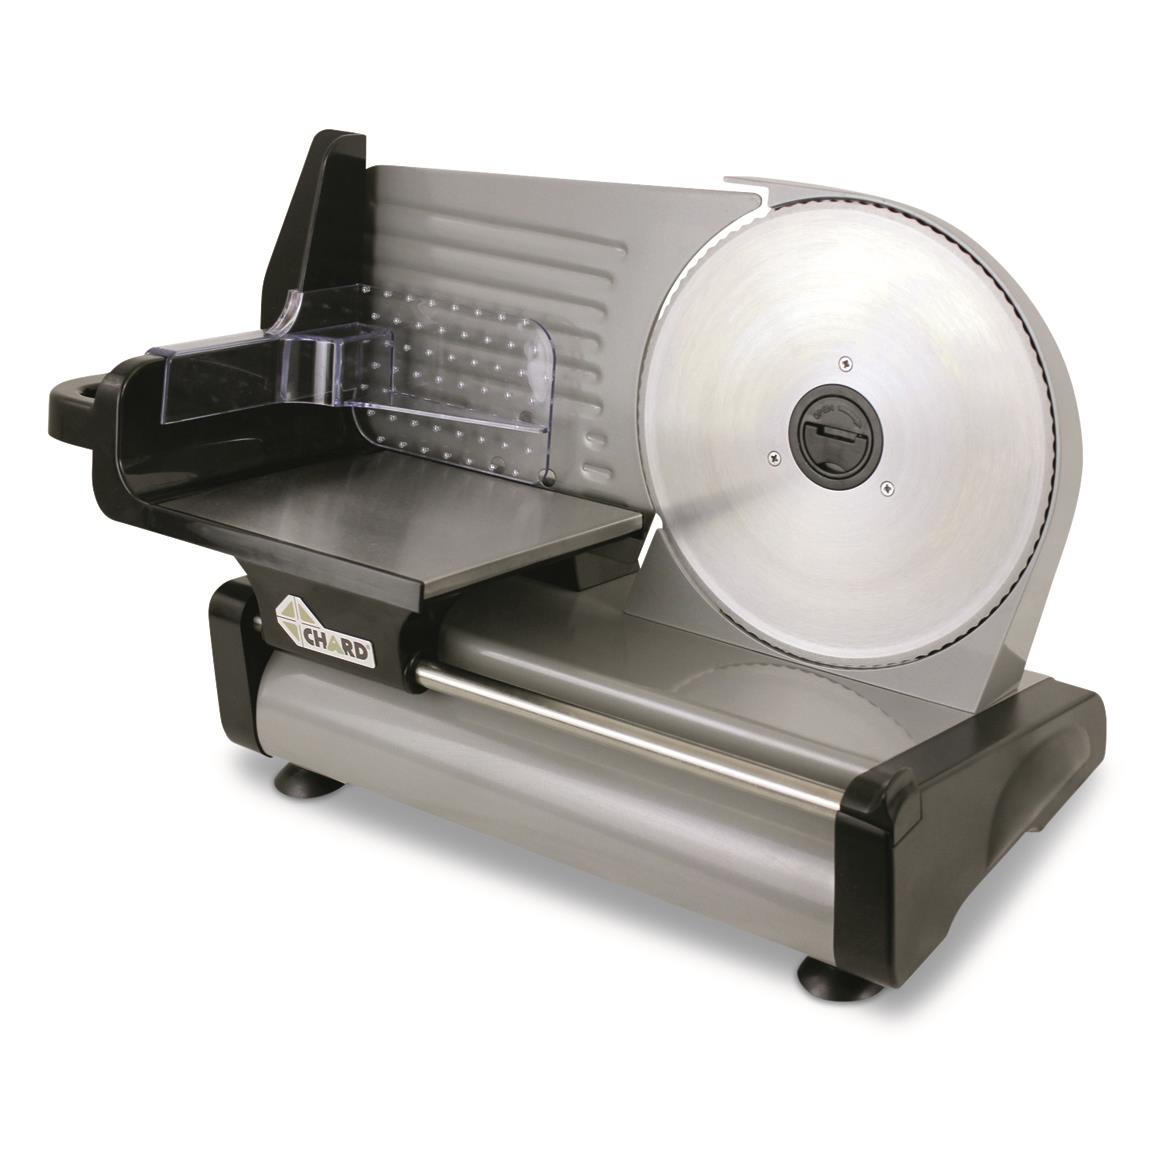 Chard 8.6" Stainless Steel Electric Food Slicer